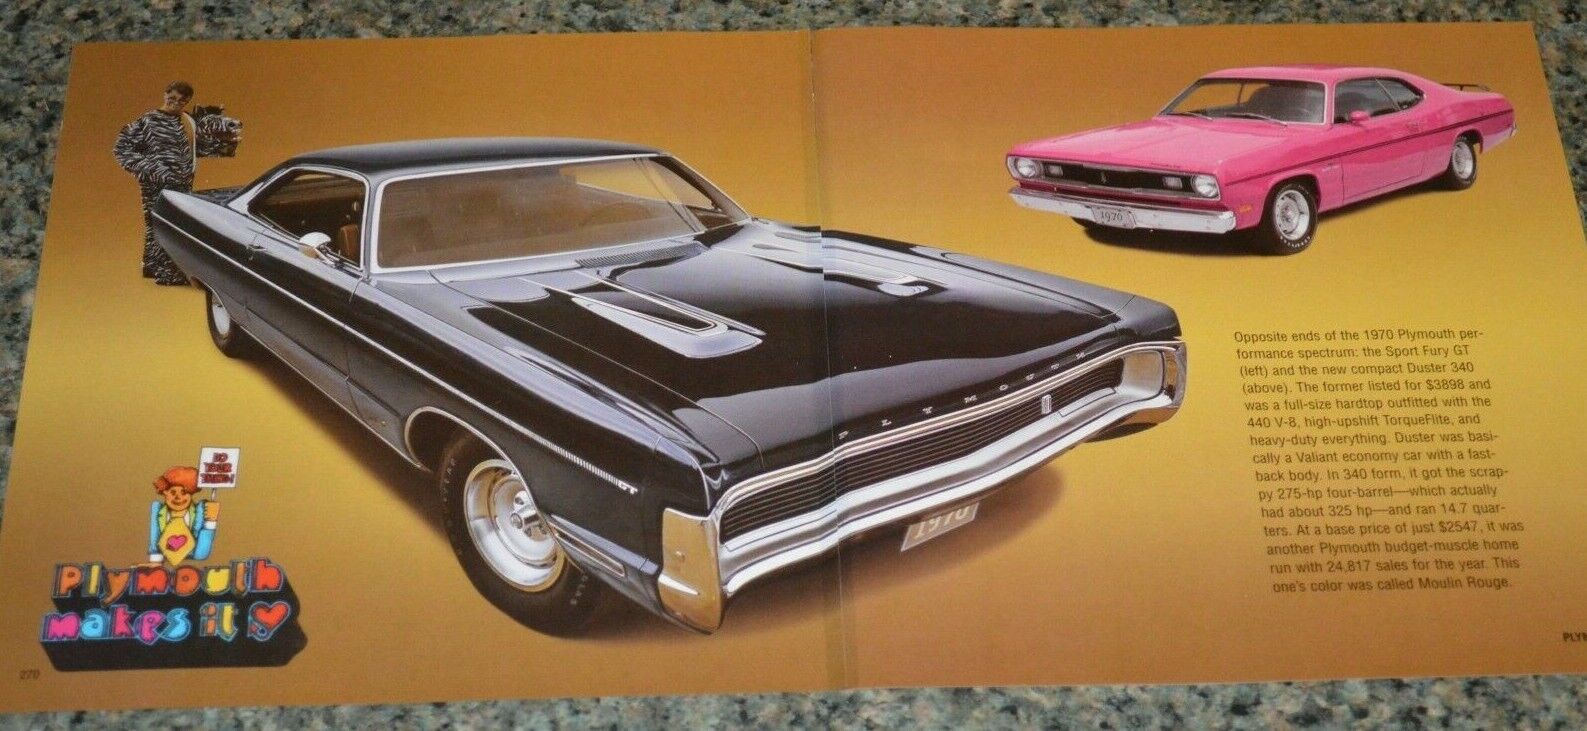 ★★1970 PLYMOUTH SPORT FURY GT / DUSTER 340 PICTURE FEATURE PRINT 70 MOPAR★★8